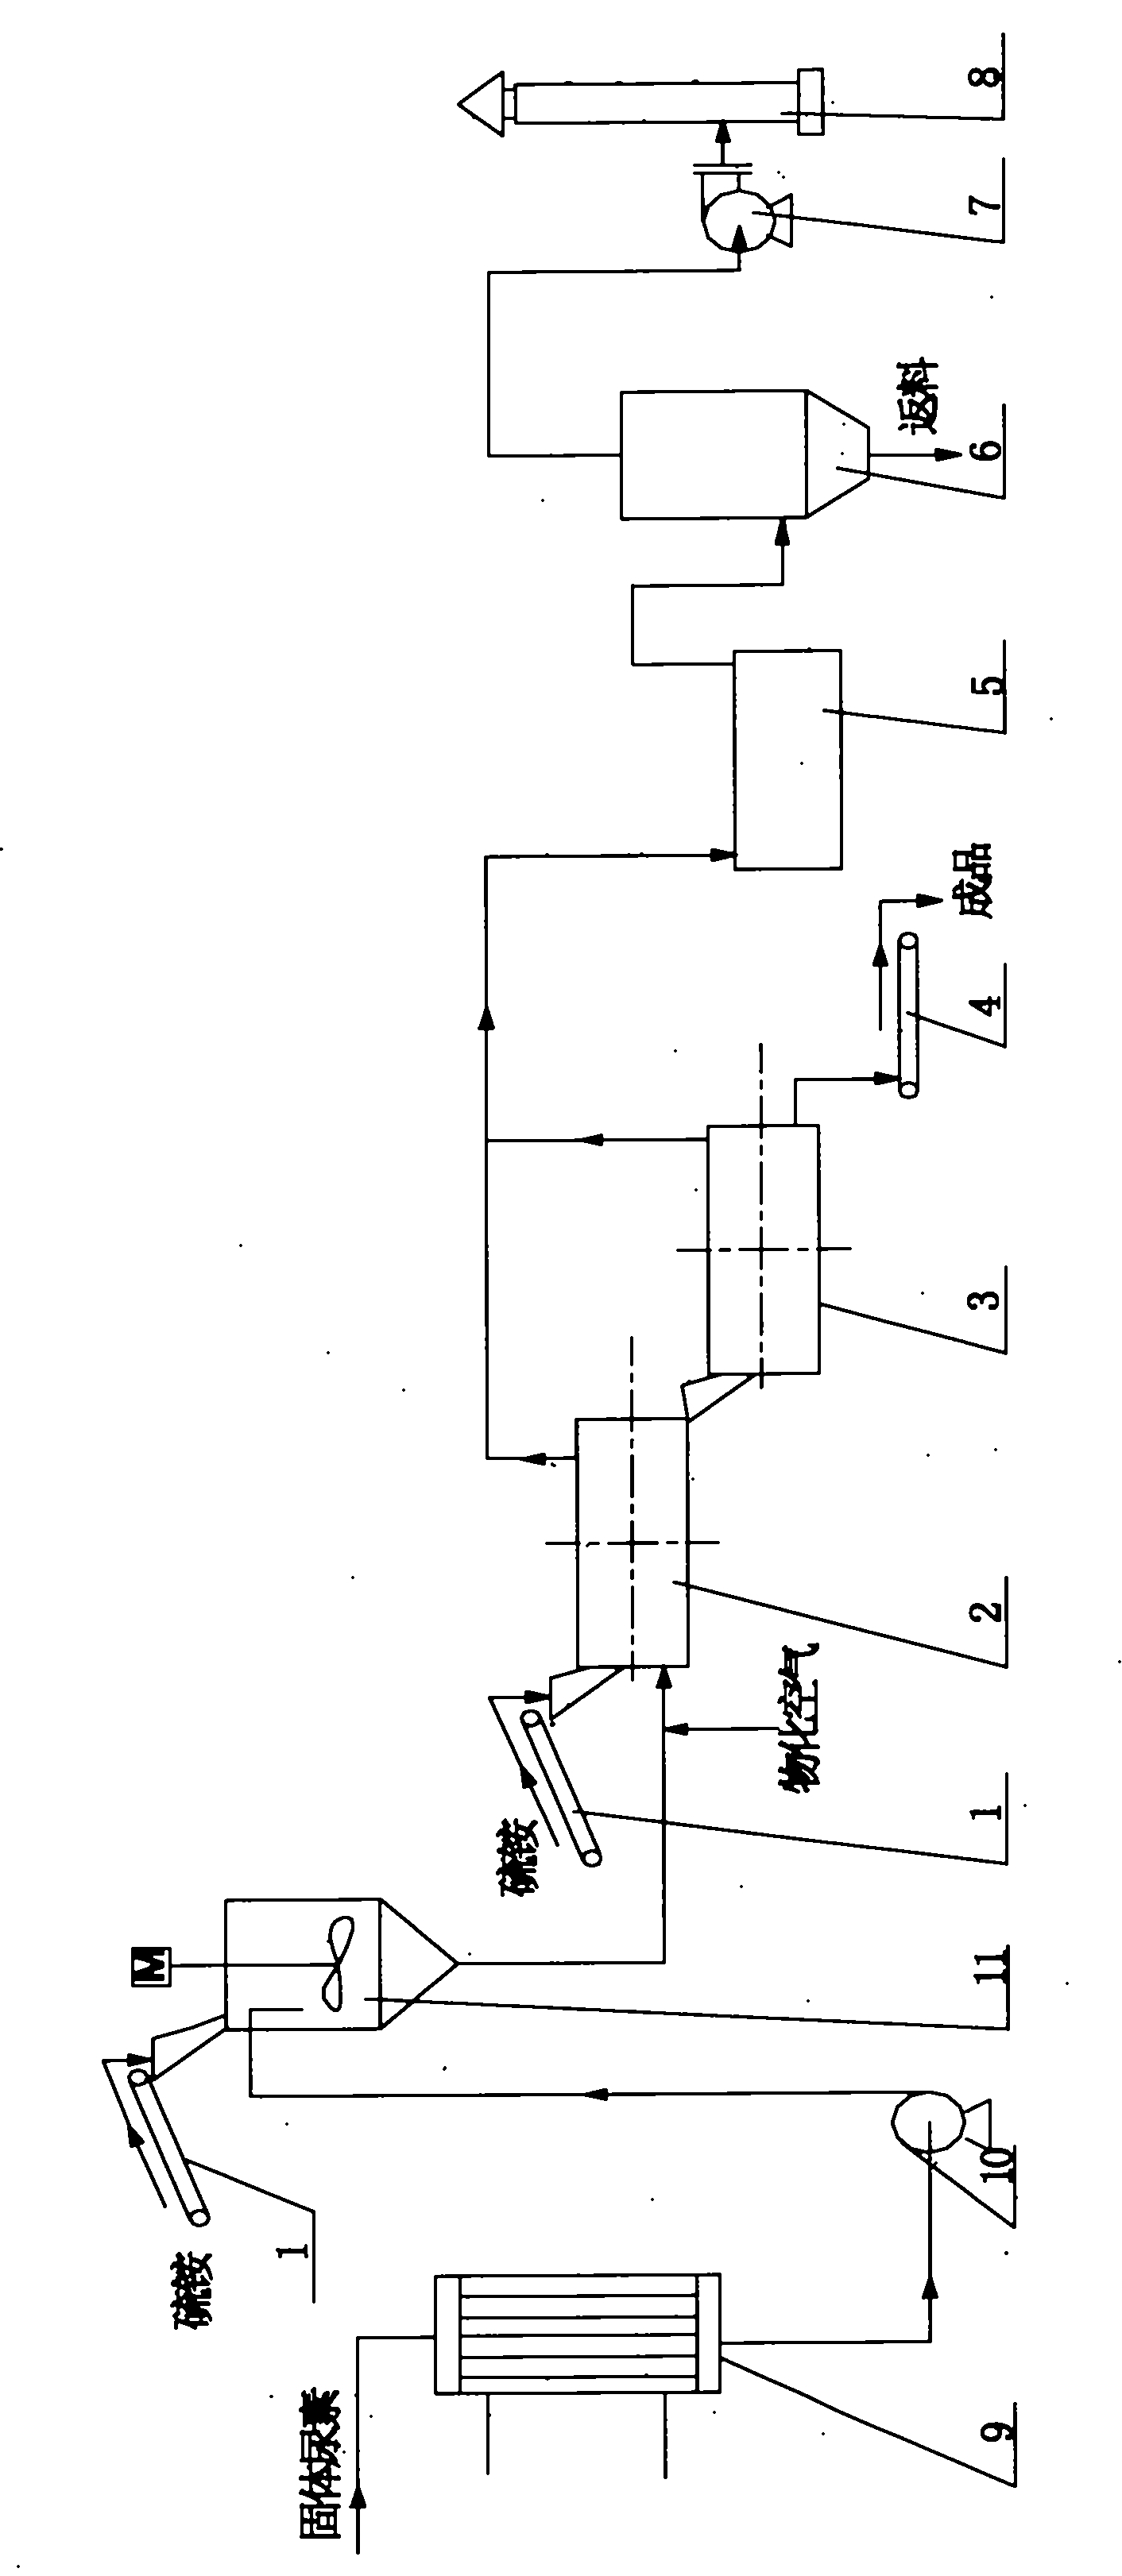 Process for producing urea ammonium sulfate by using by-product of ammonium sulfate from flue gas desulfurization with ammonia process